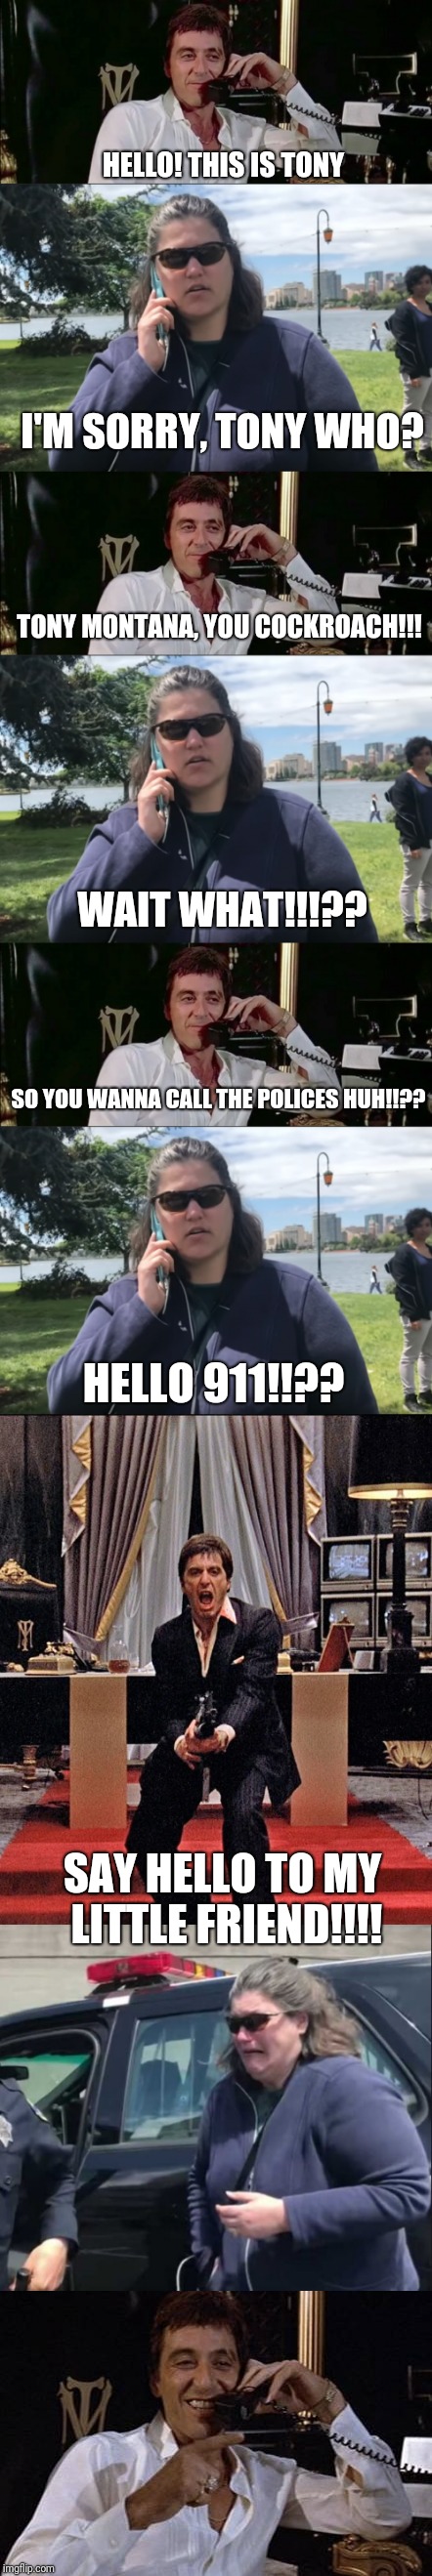 HELLO! THIS IS TONY; I'M SORRY, TONY WHO? TONY MONTANA, YOU COCKROACH!!! WAIT WHAT!!!?? SO YOU WANNA CALL THE POLICES HUH!!?? HELLO 911!!?? SAY HELLO TO MY LITTLE FRIEND!!!! | image tagged in scarface meme | made w/ Imgflip meme maker